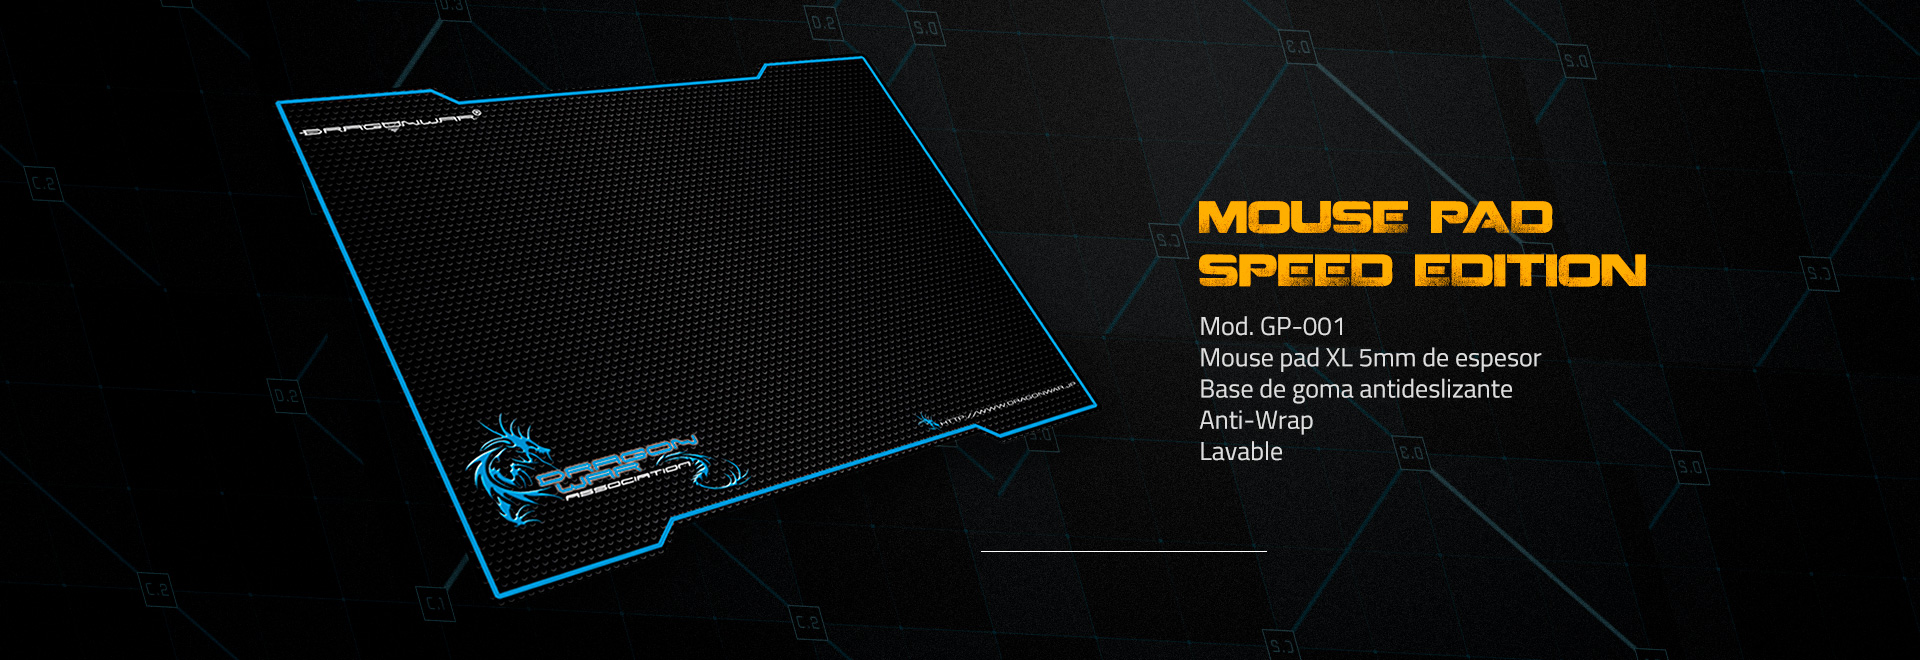 Mouse Pad Speed Edition - Flyer: 0